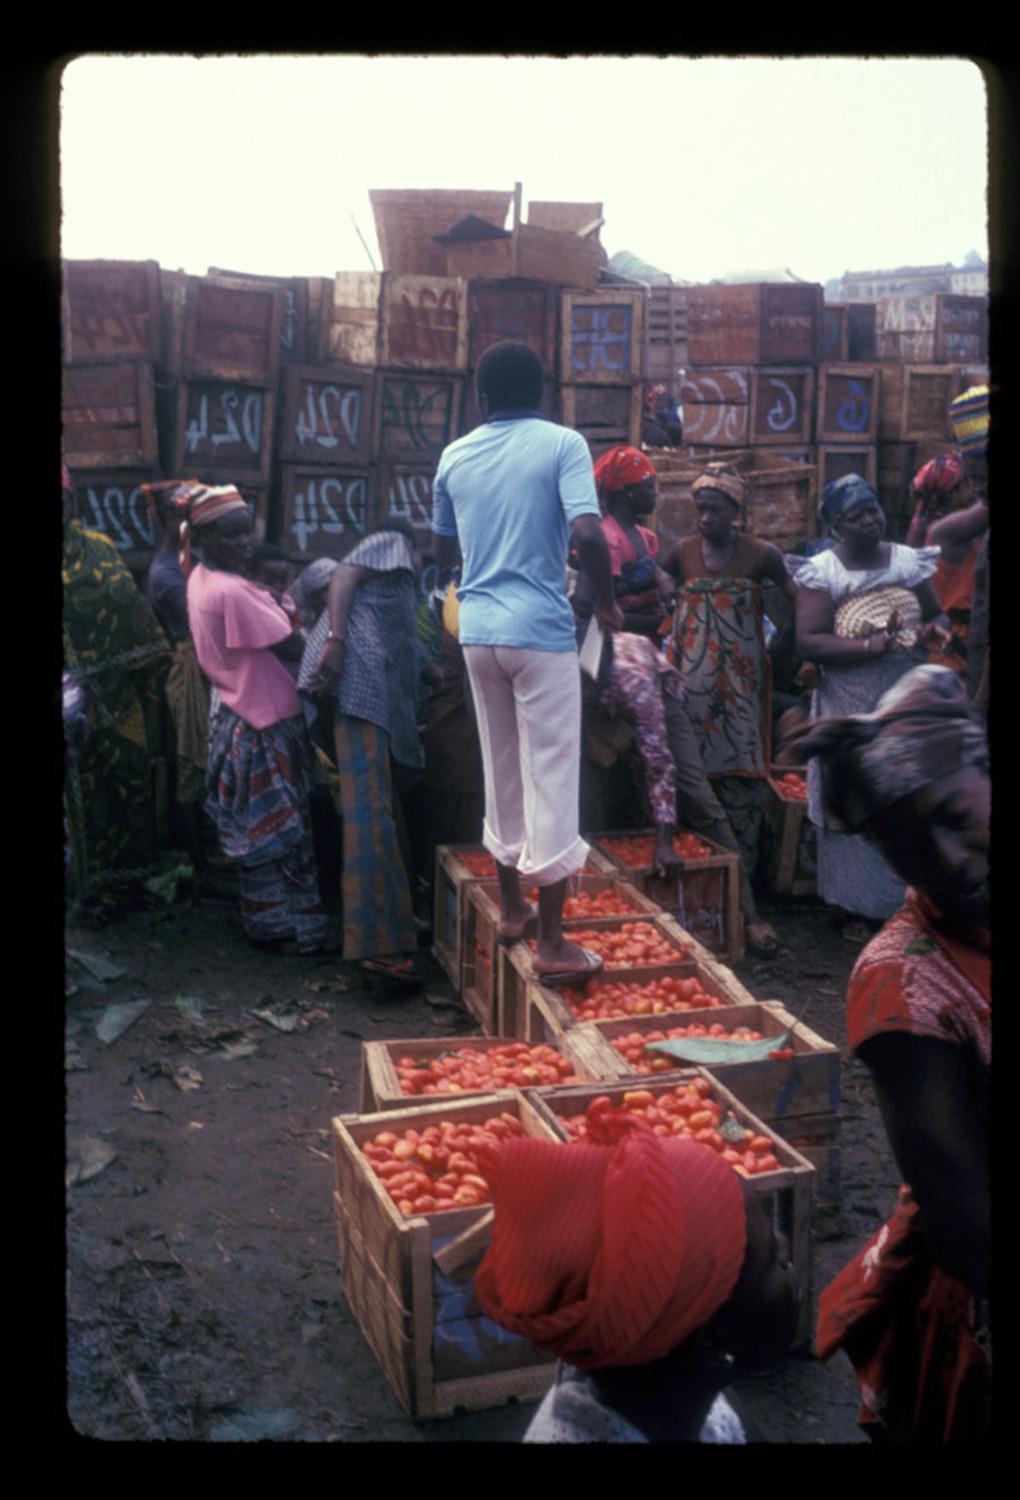 Young man standing on tomato boxes